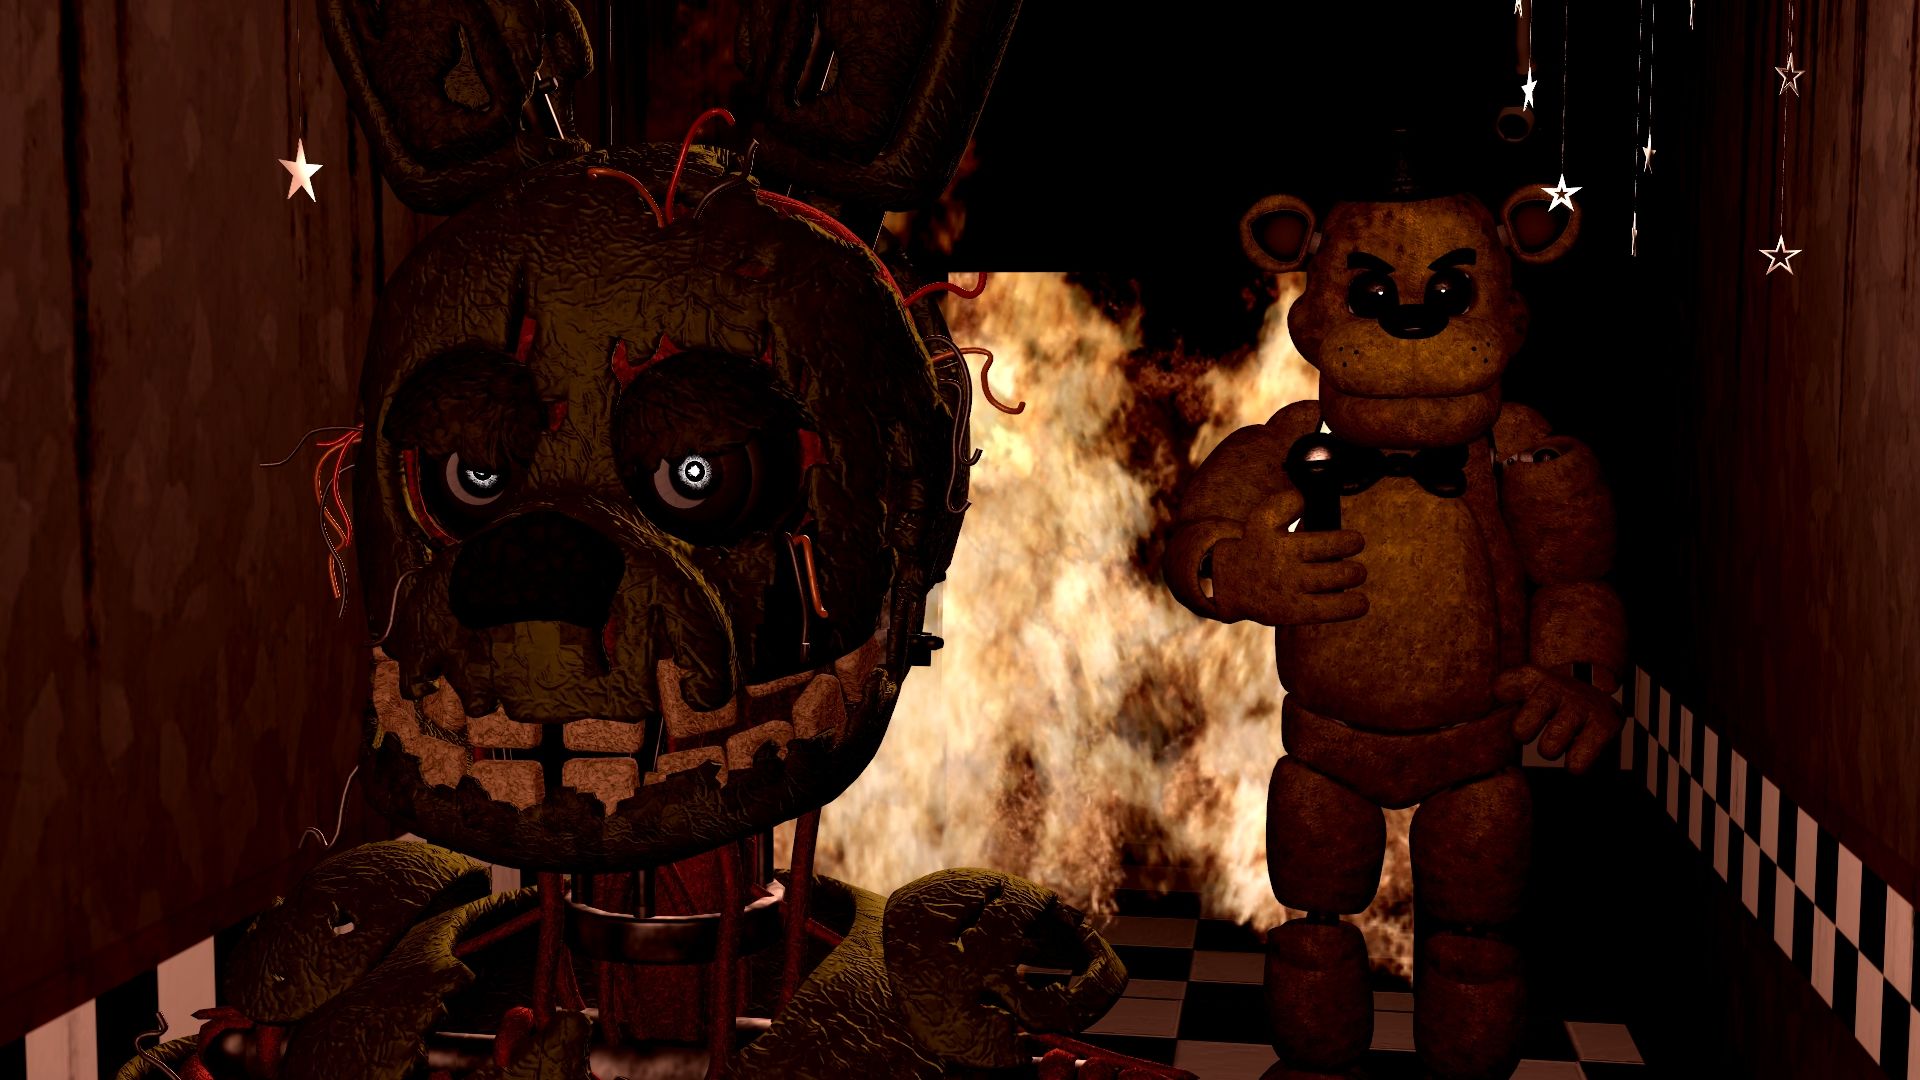 Gmod A Golden Freddy and Springtrap, just for the season.